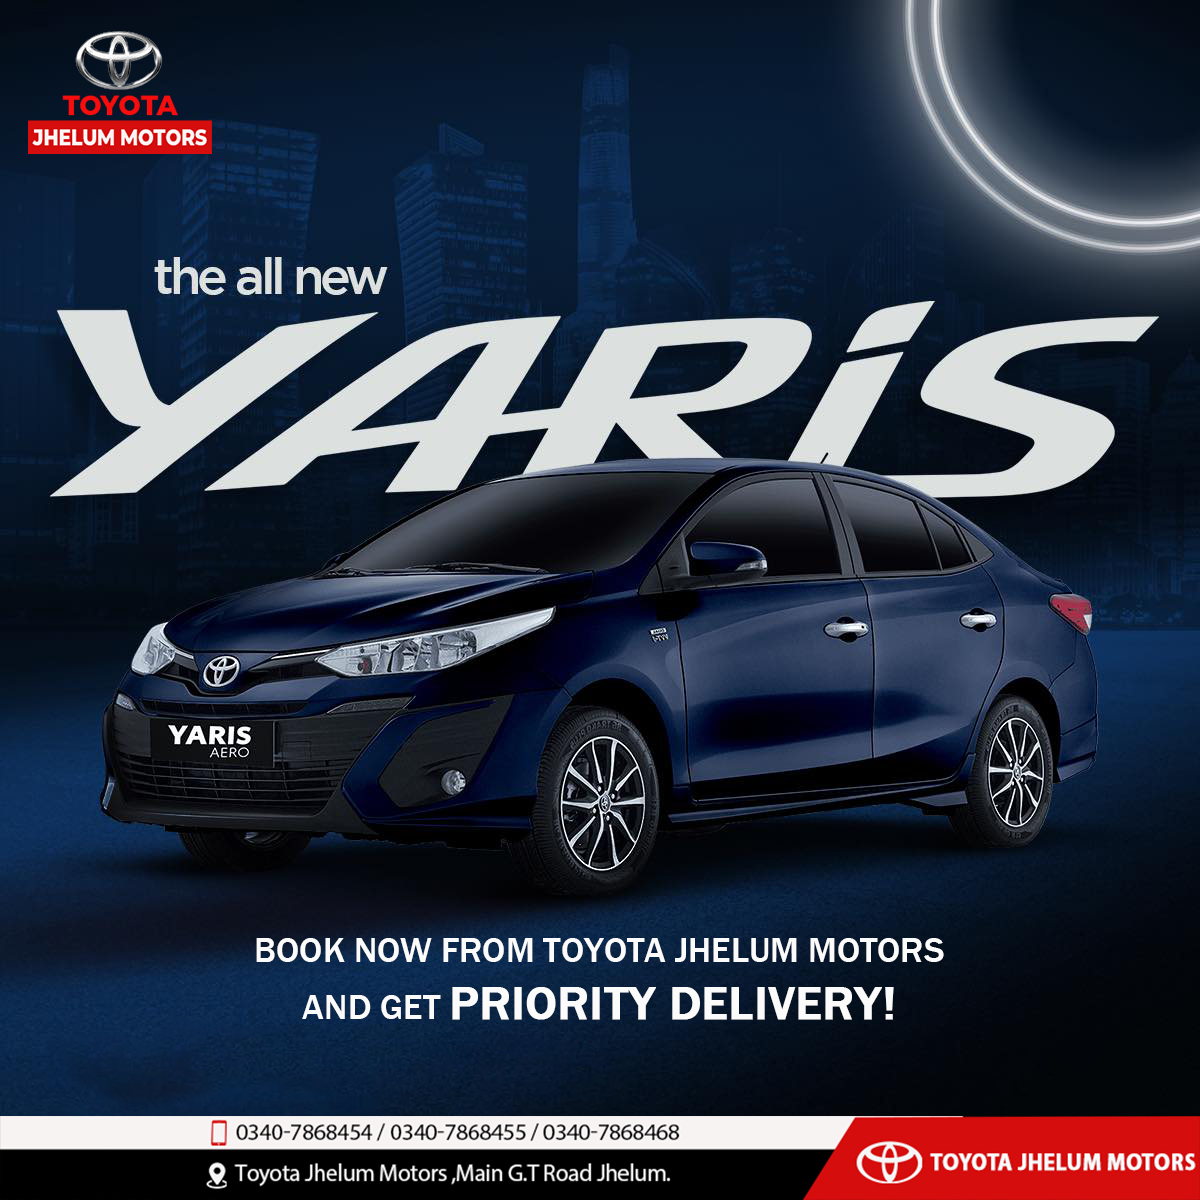 Booking now open for the all-new Yaris Aero at Toyota Jhelum Motors!
Secure yours today and enjoy priority delivery.

 #ToyotaJhelumMotors #Toyota2024 #BookNow  #YarisAero #PriorityDelivery #ToyotaJhelum #BookNow #MoveYourWorld #toyotayaris #ReadyForAdventure #PriorityDelivery